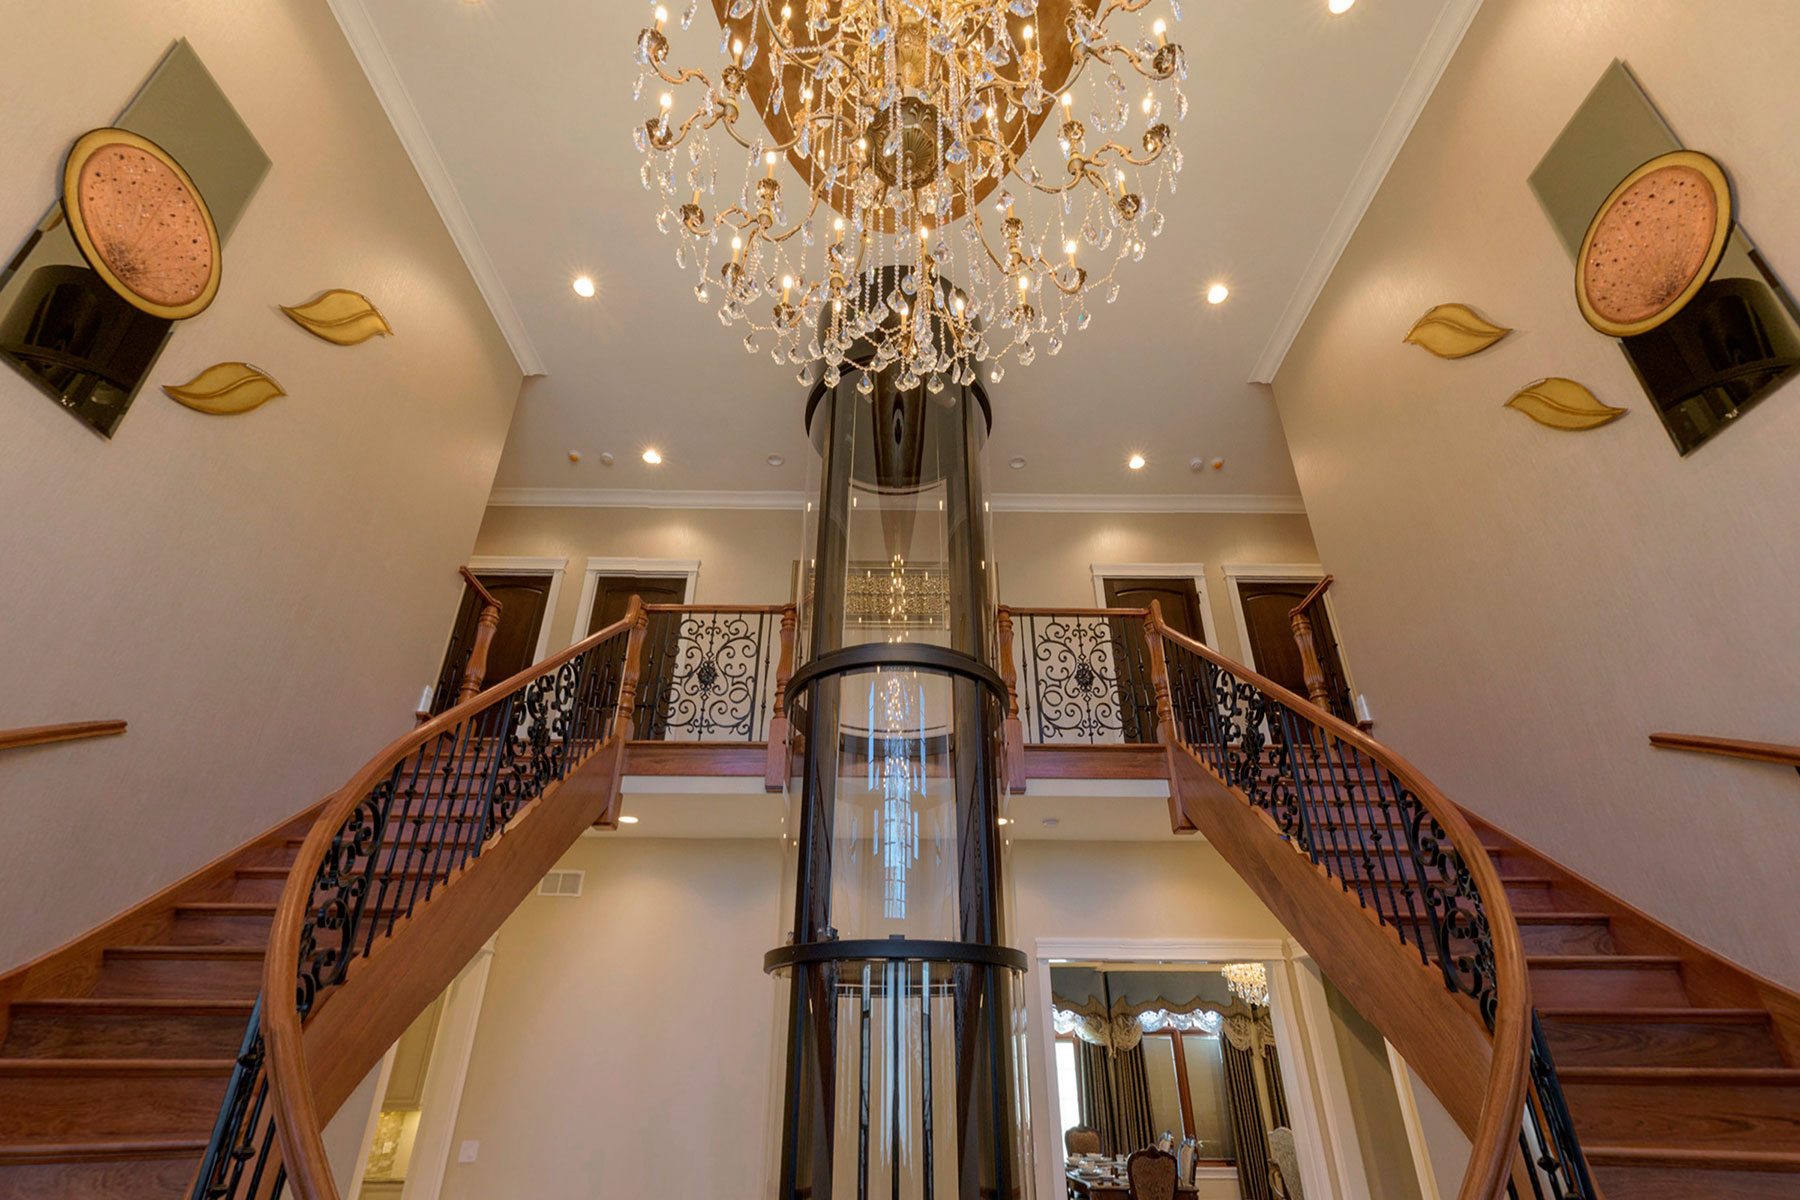 Foyer, Stairs Ceiling Lights - Mango Ave., Morton Grove, IL Custom Home. America's Custom Home Builders: New Construction, Remodeling, Restoration Services. Residential and Commercial.